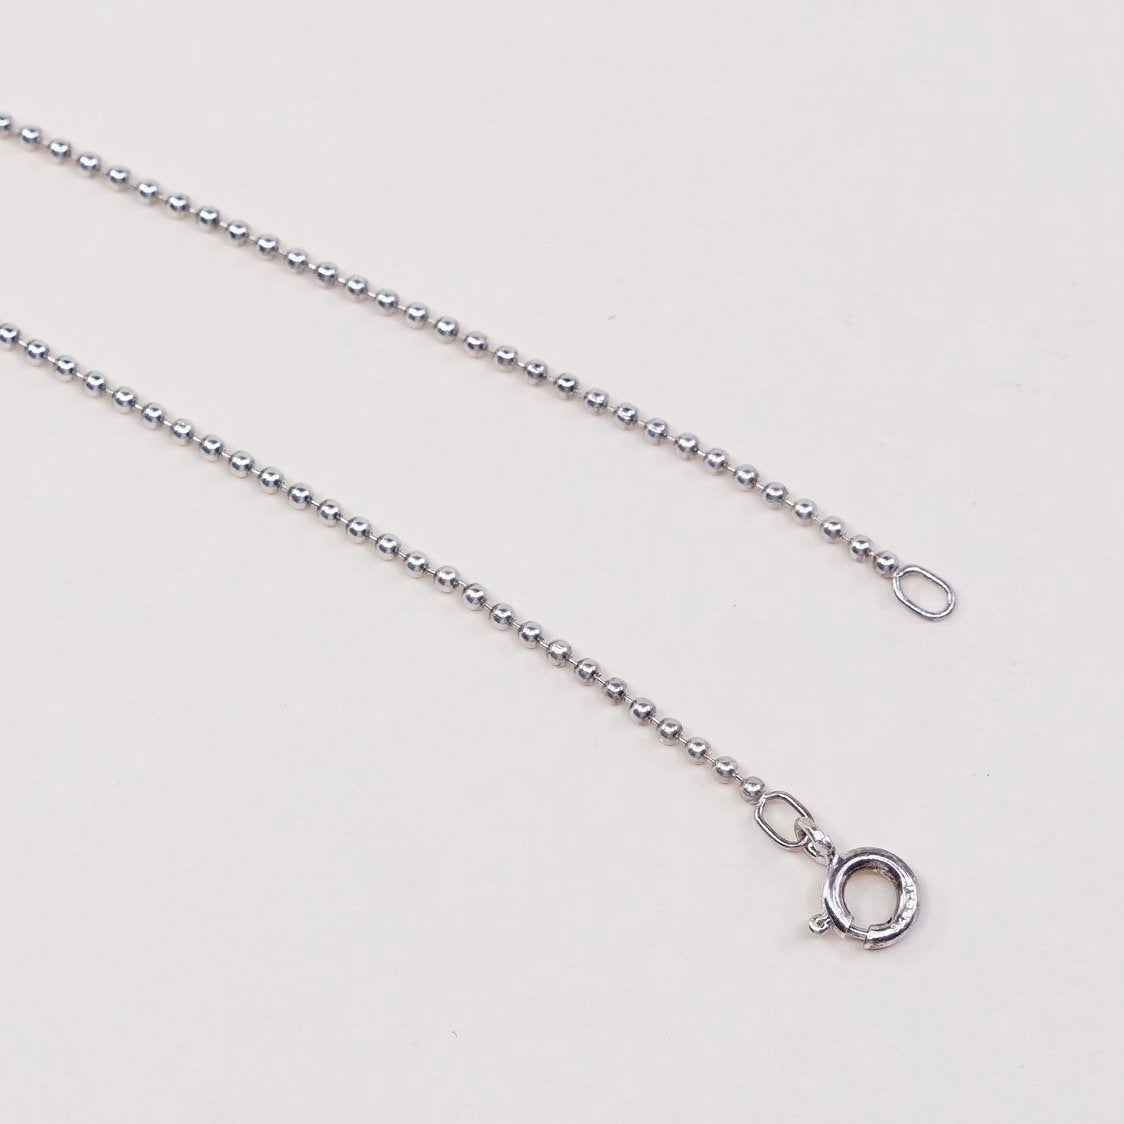 16", 1mm, sterling silver beads chain, Italy made 925 silver necklace